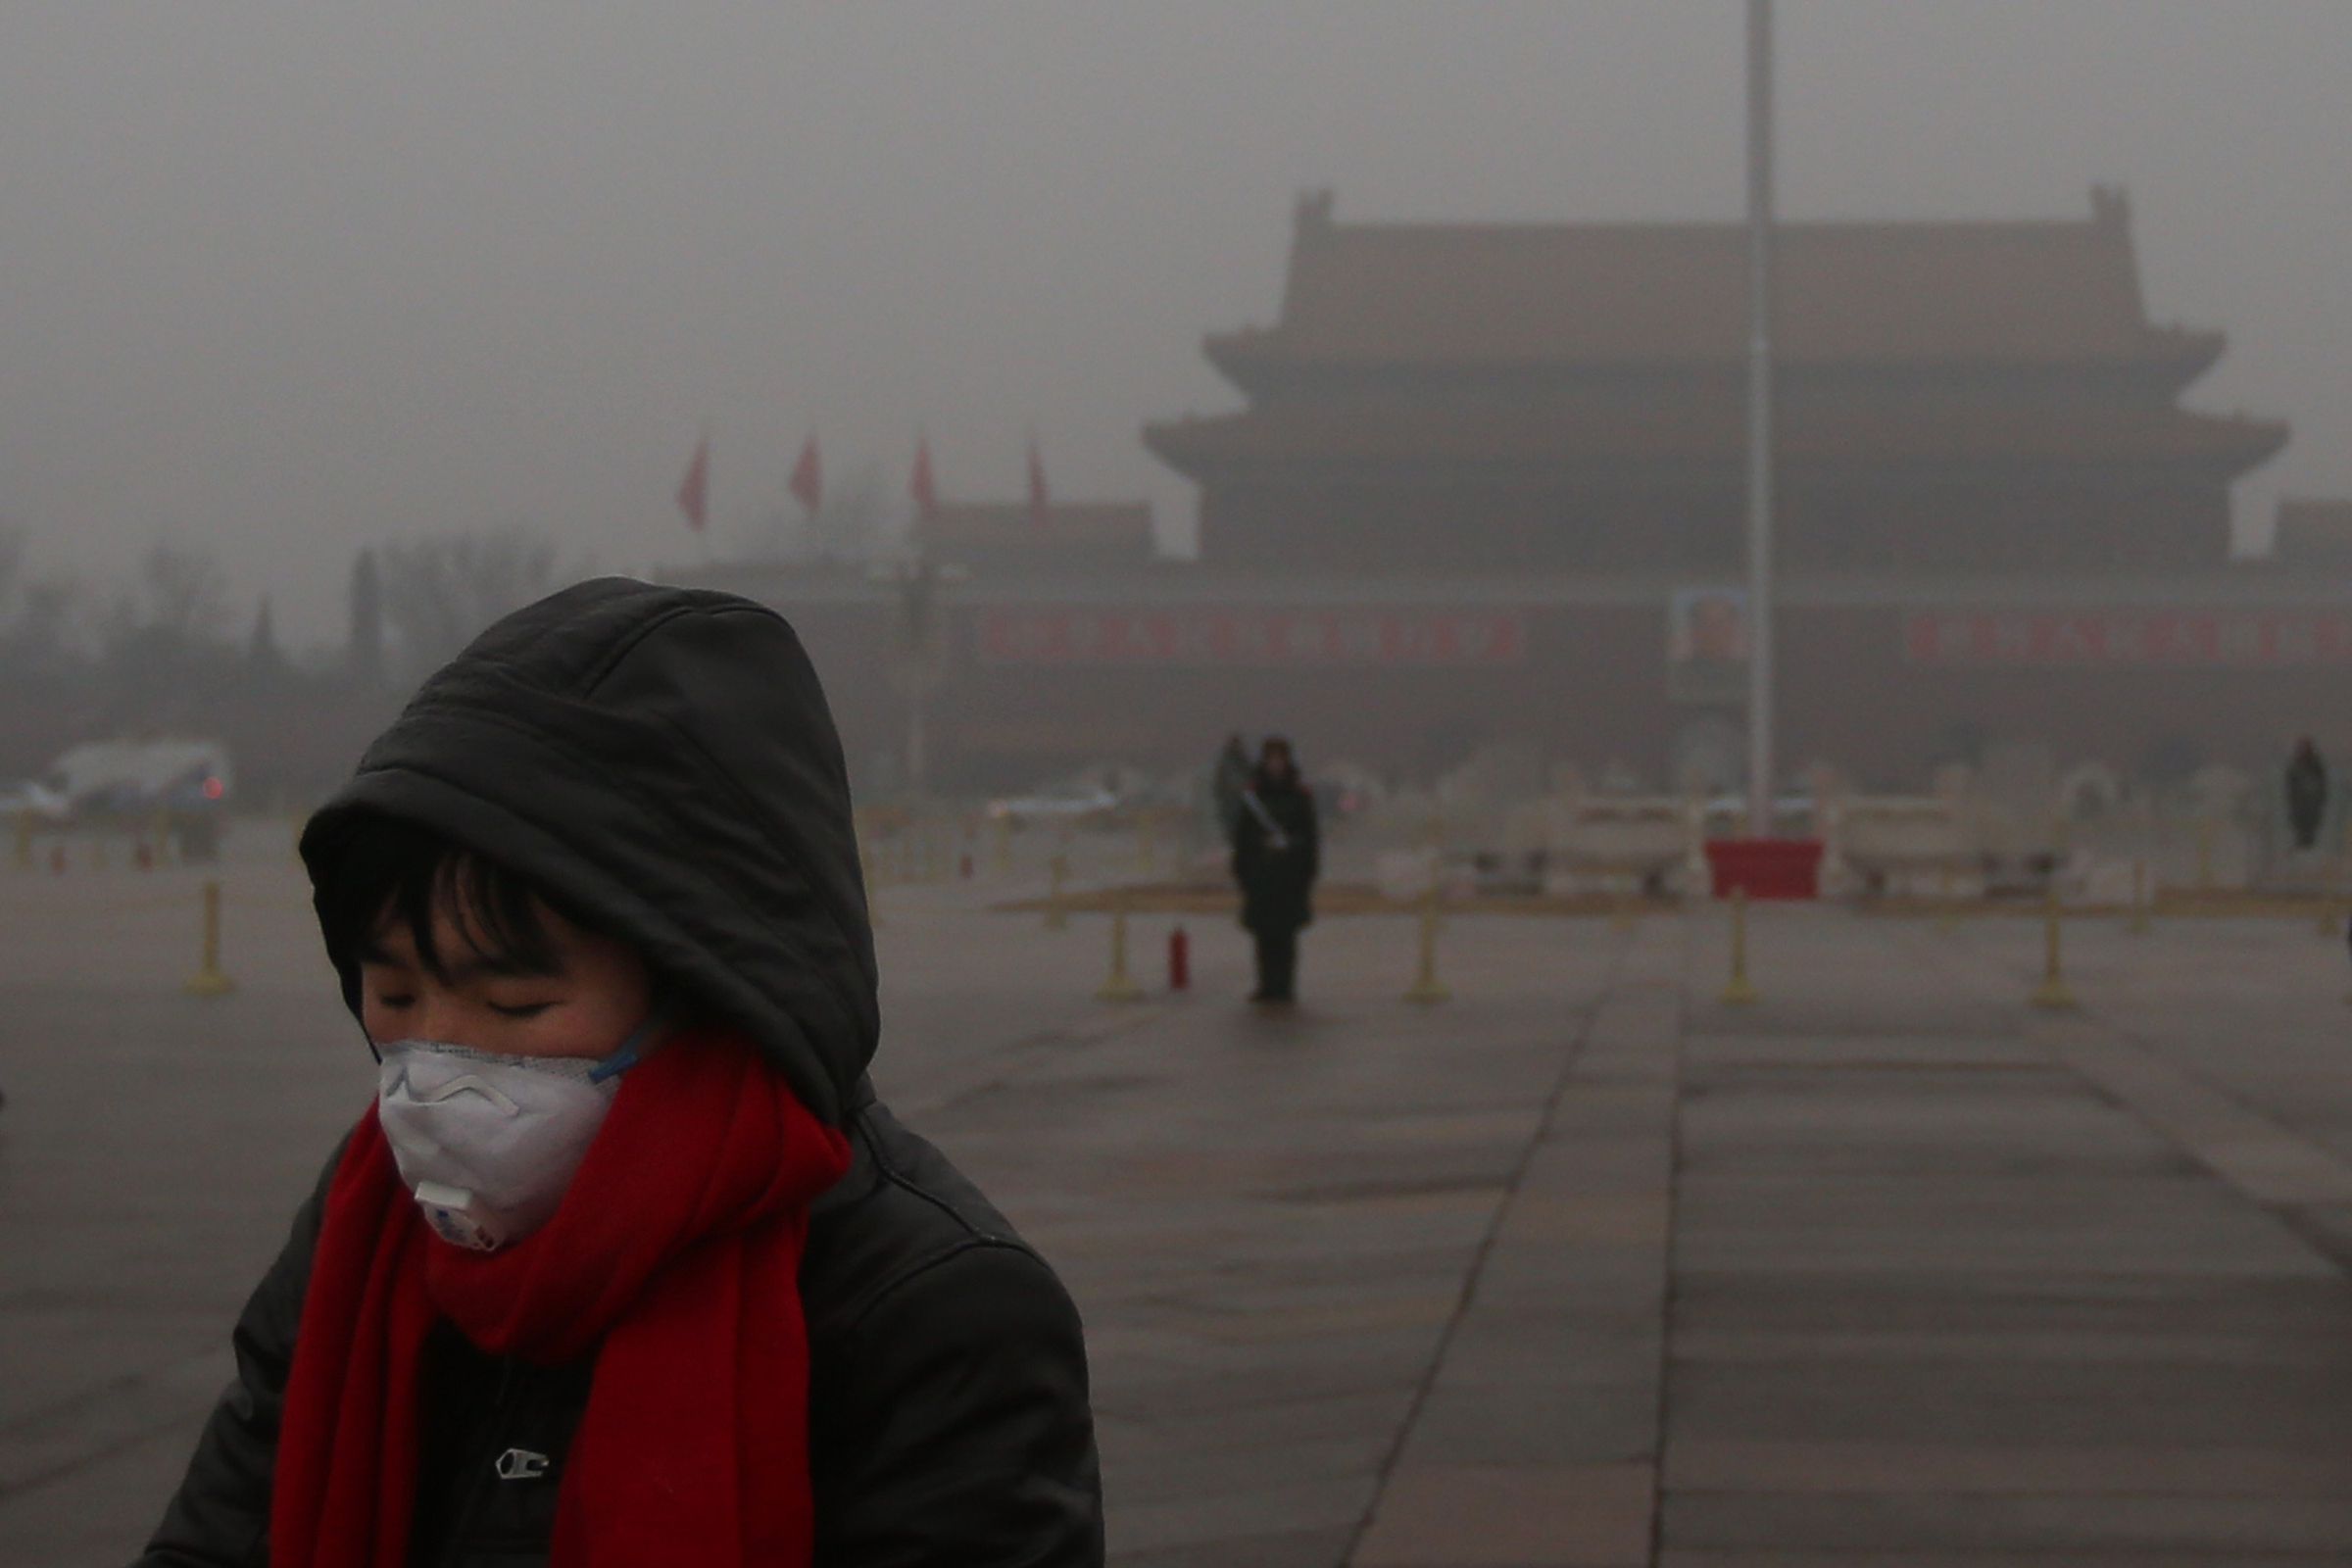 Beijing Air Pollution Is Still At The Dangerous Level